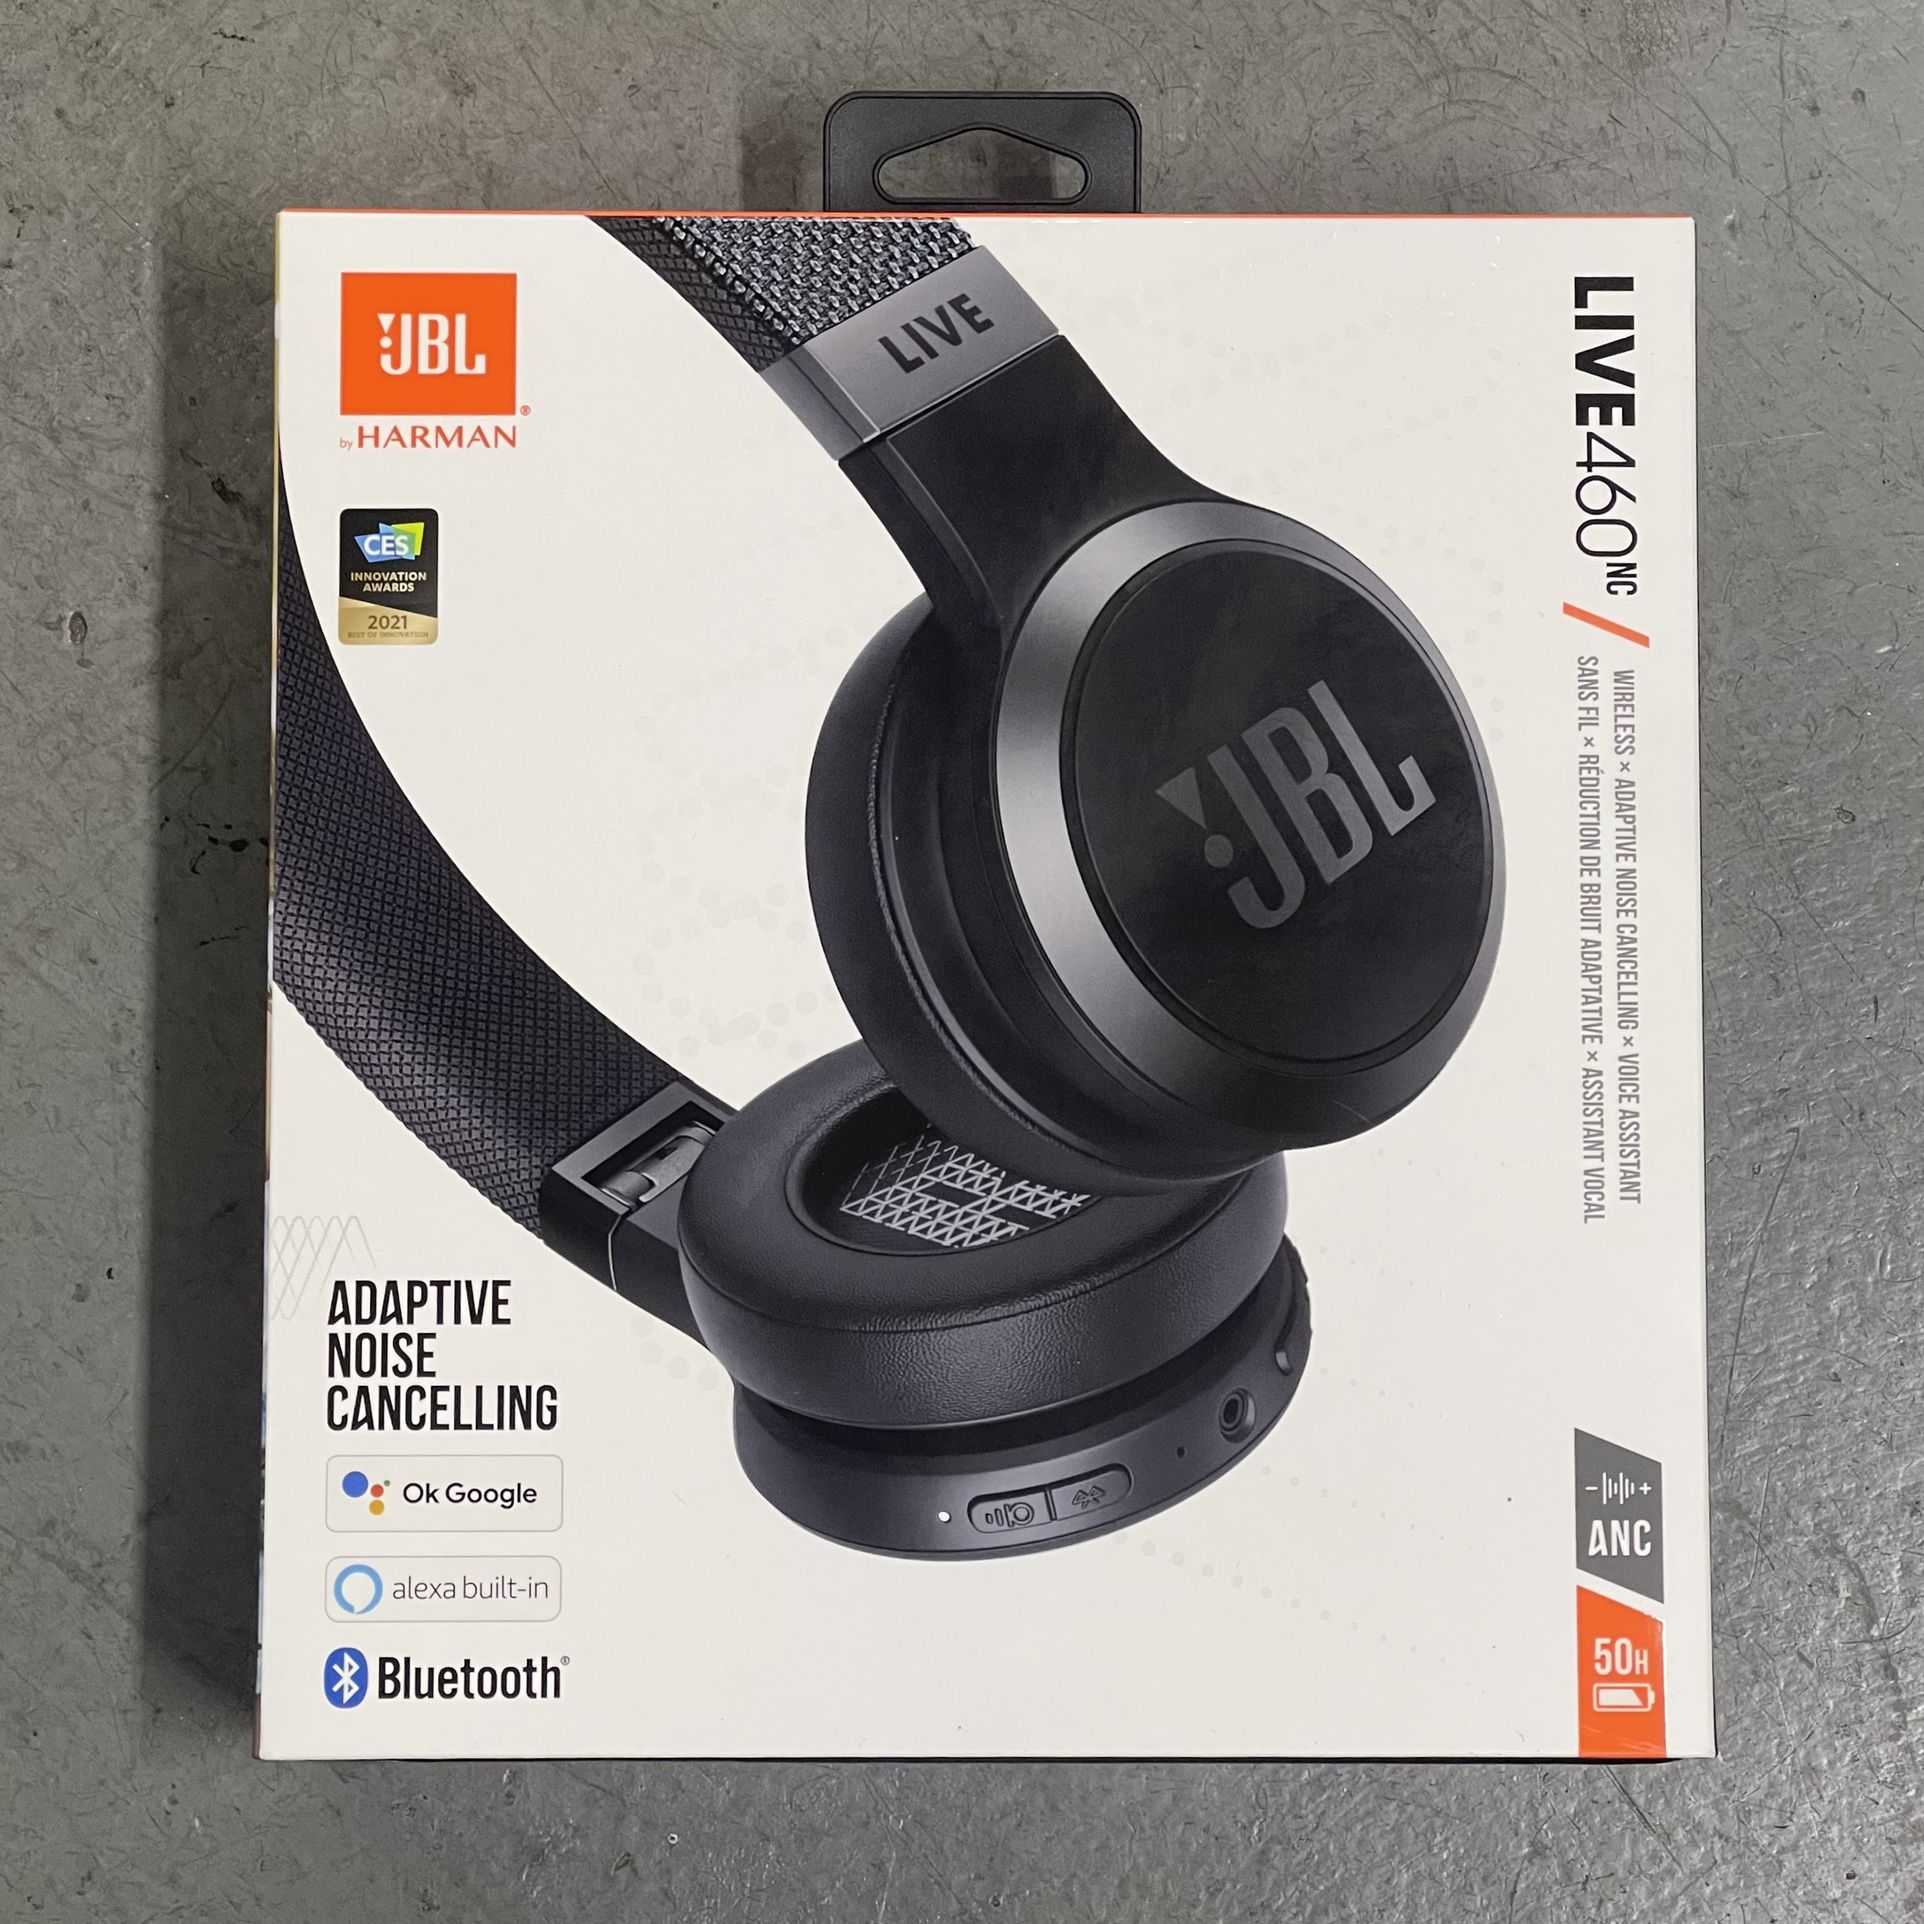 JBL Live 460 NC. Bluetooth Over Ear Headphones. Noise Cancelling. Voice Assistant. Stereo calls. Up to 50 hours of battery. 